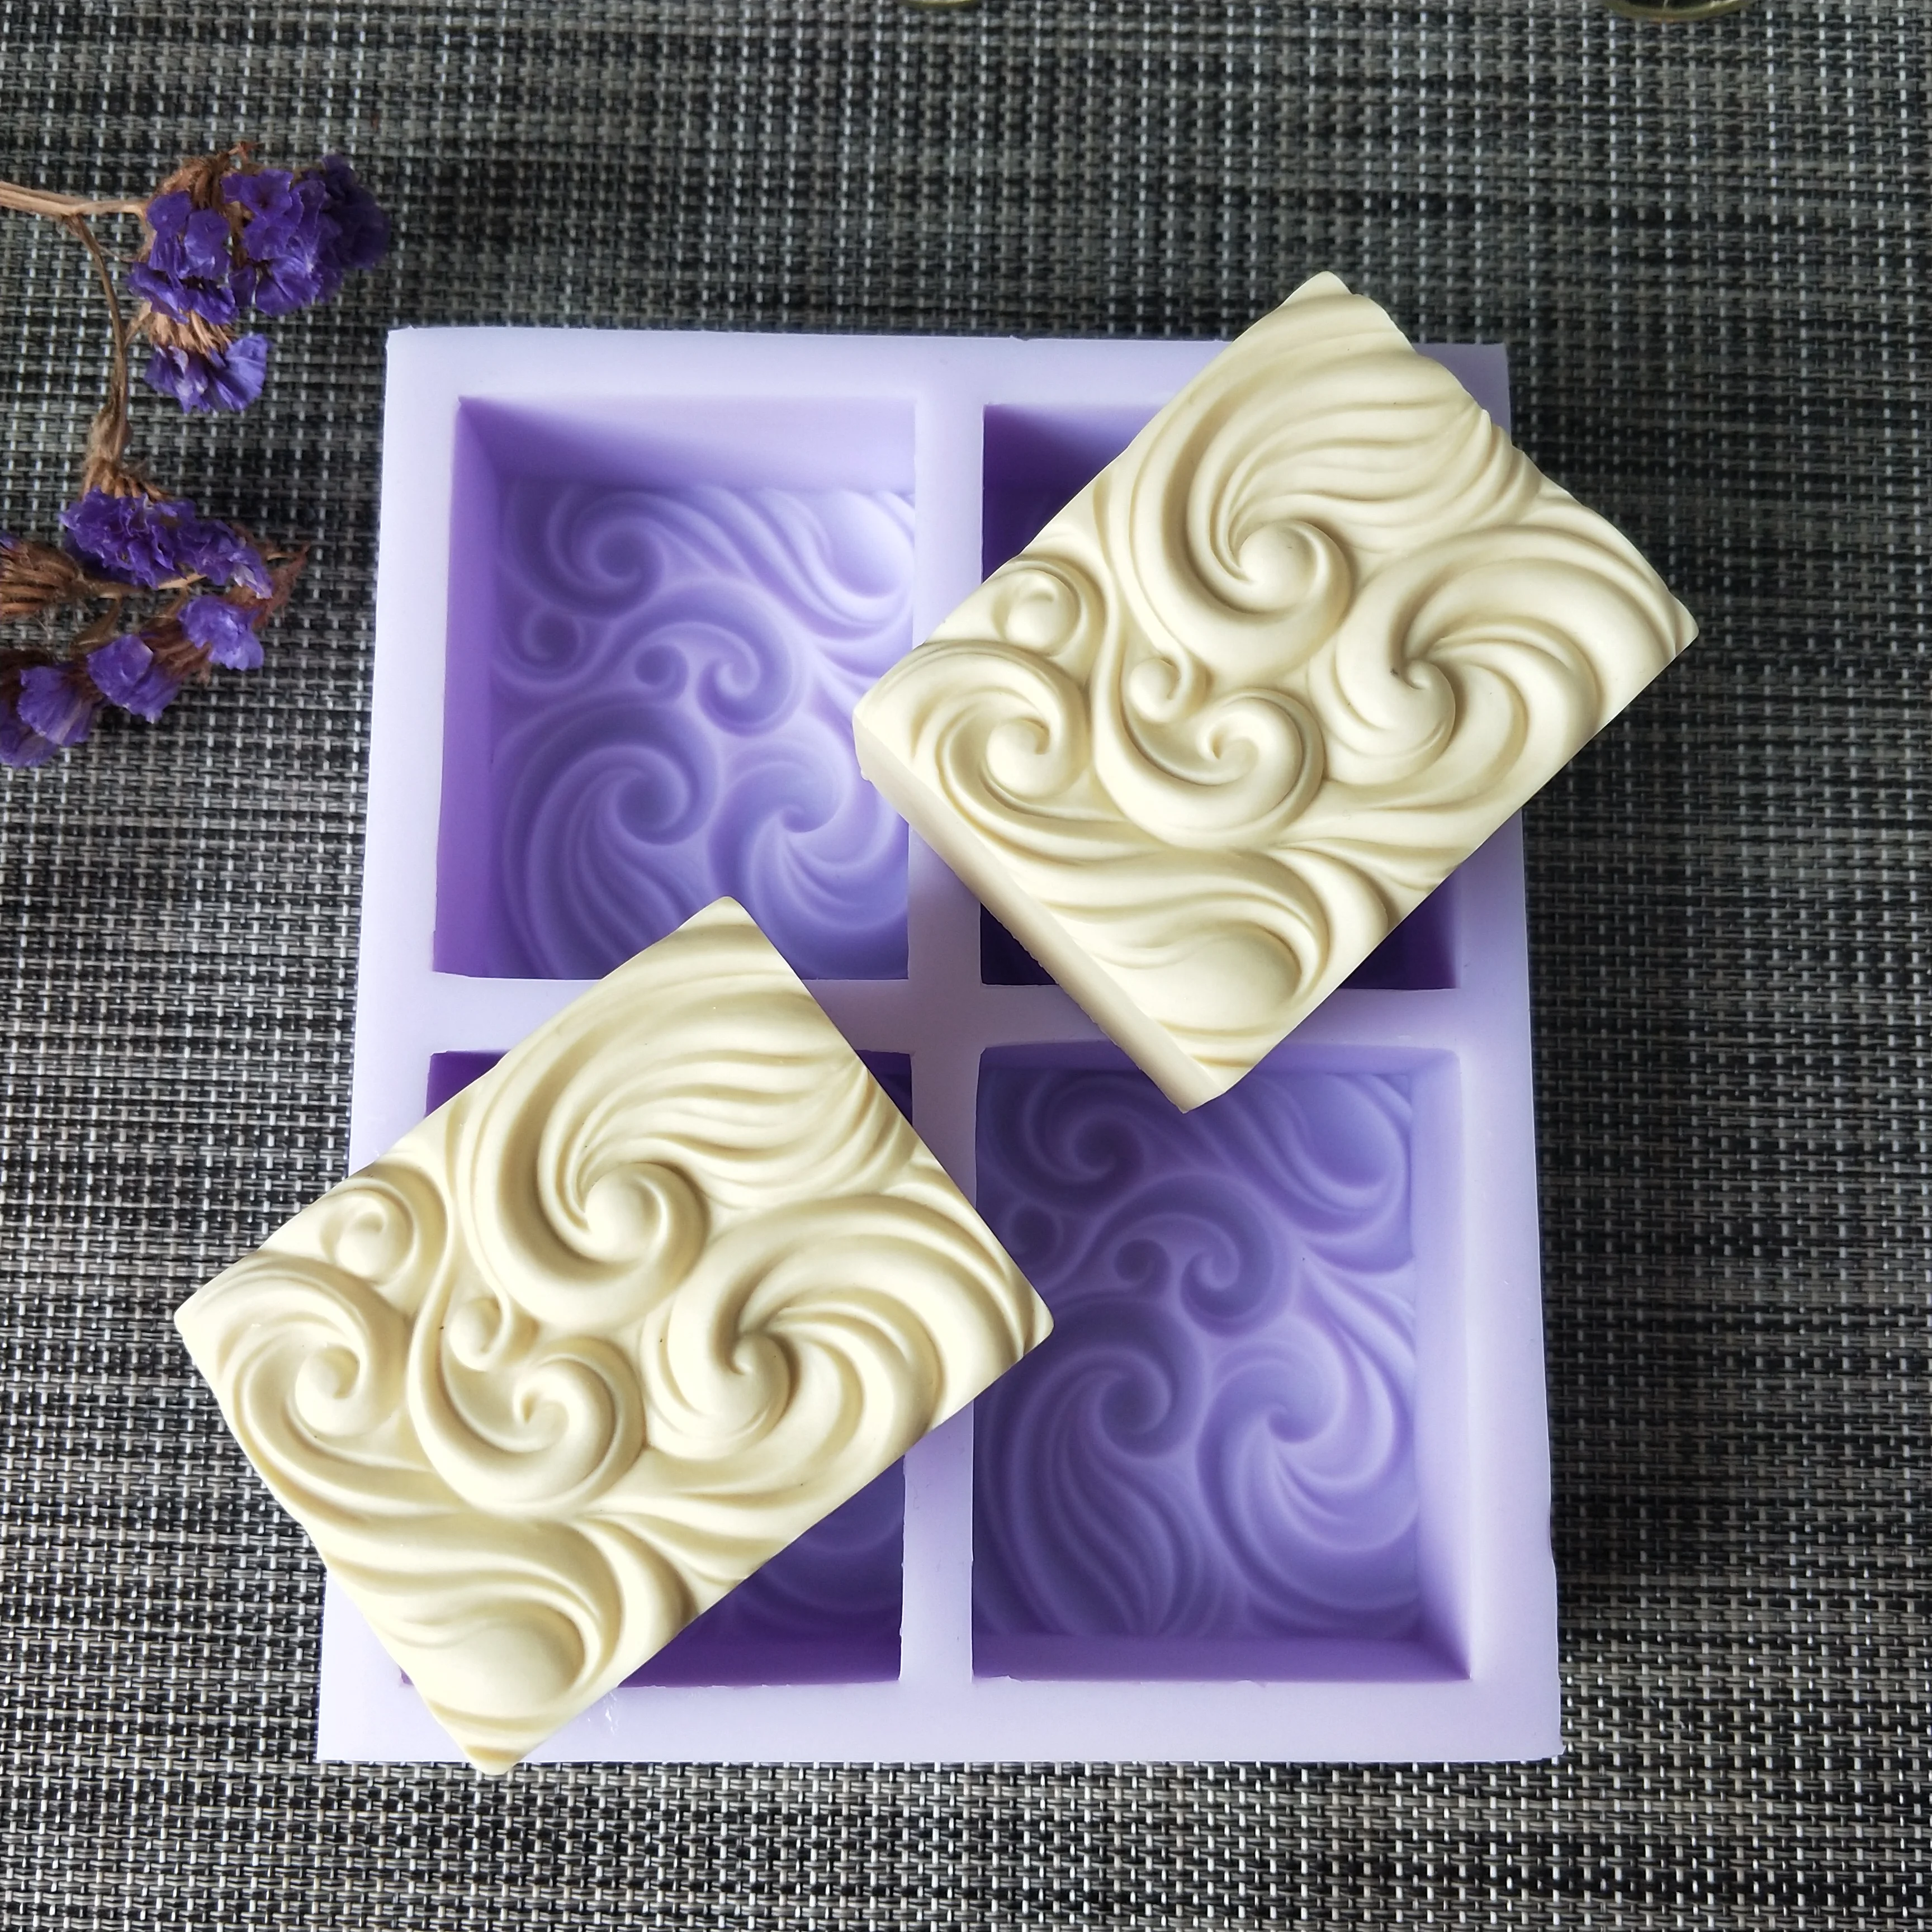 

PRZY Silicone Soap Mold Four-hole Square Ripple Soap Handmade Soap DIY Aroma Mould Soap Making Moulds Resin Clay Molds